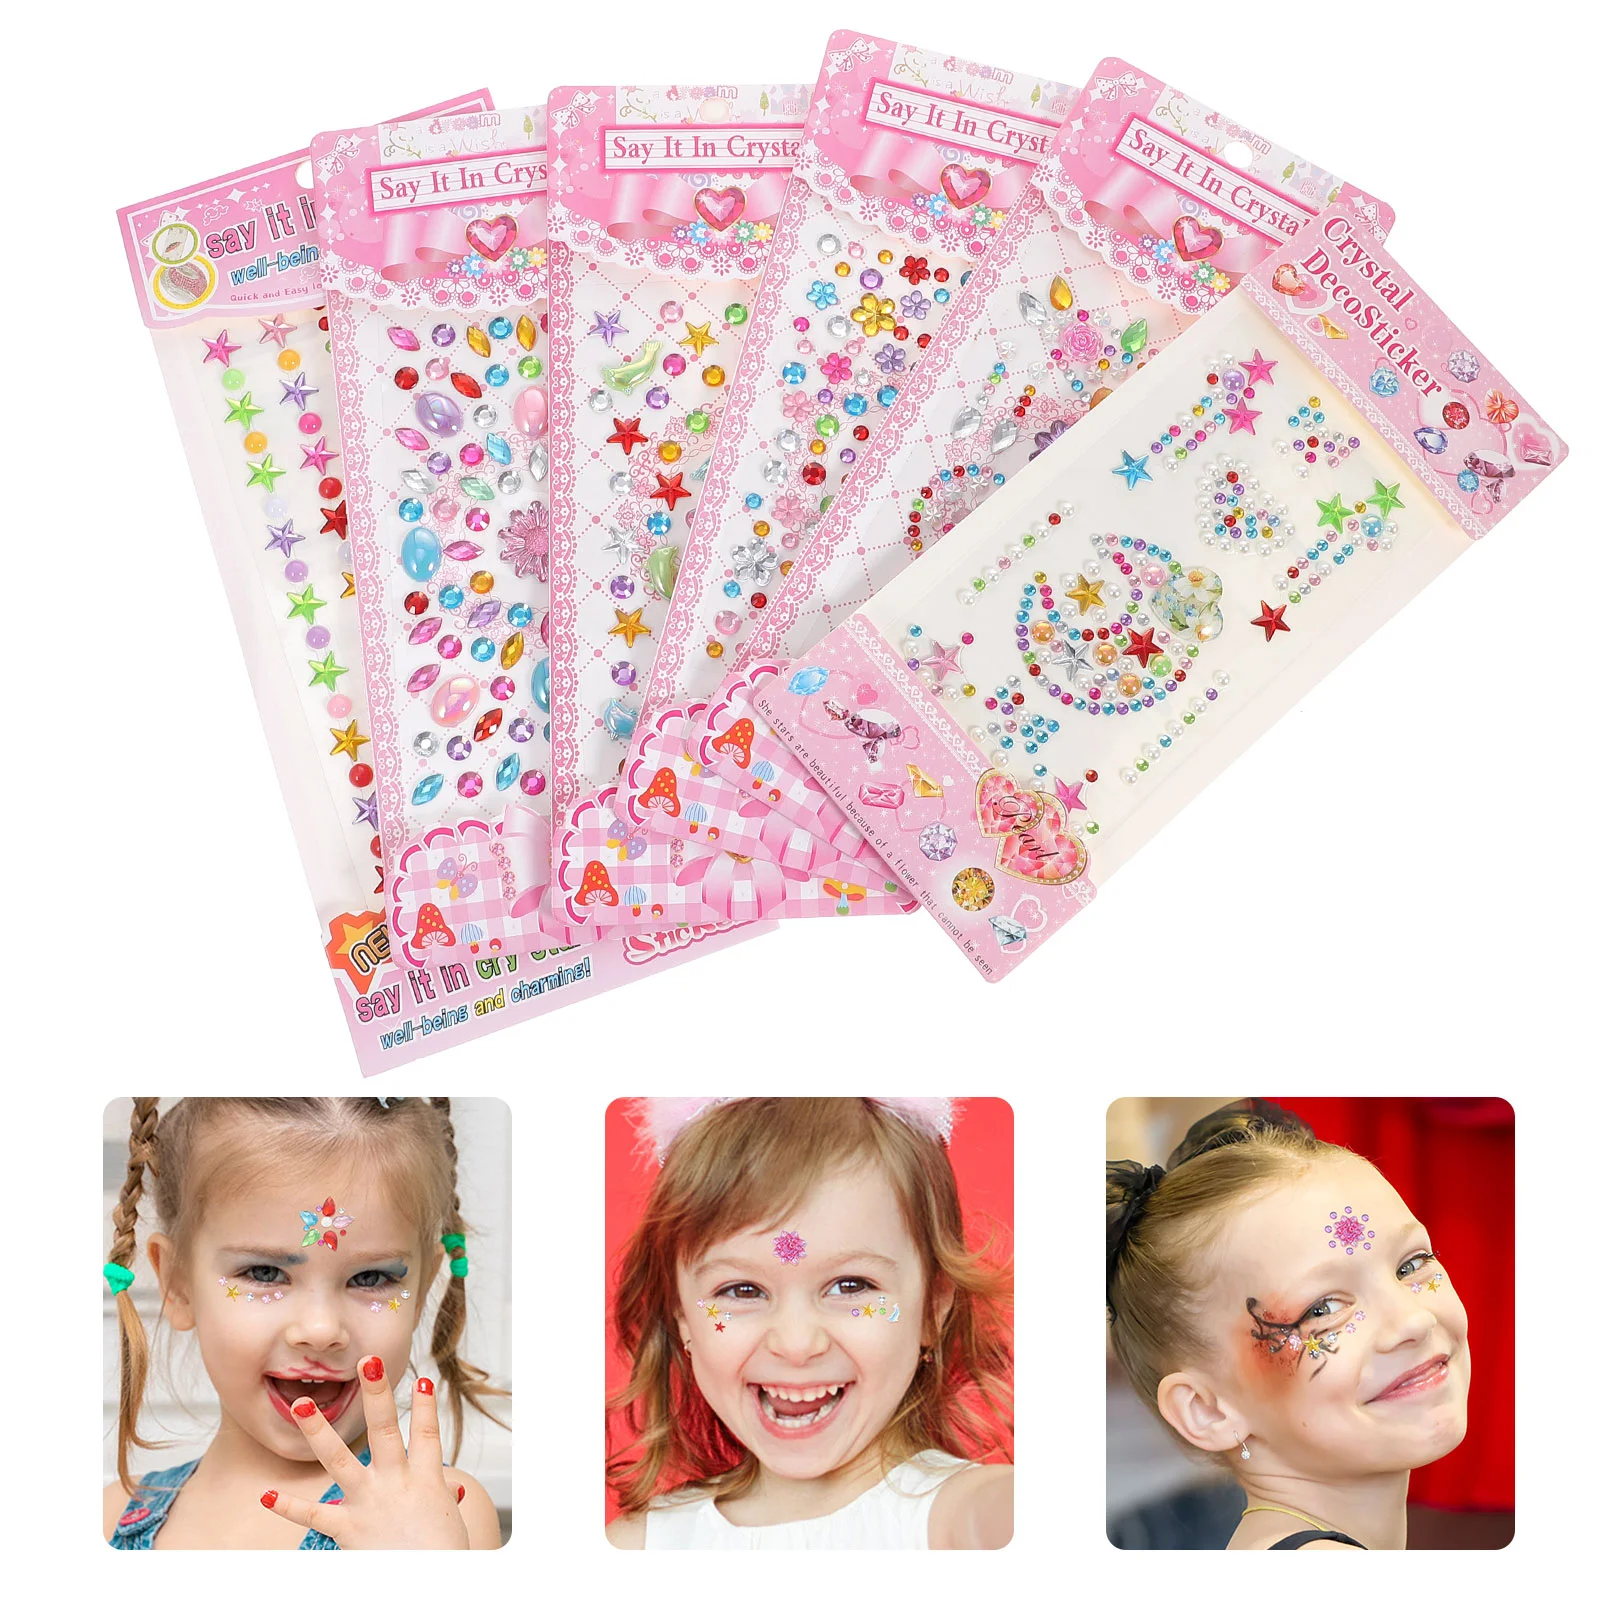 

6 Sheets Eye Face Body Gems Jewels Rhinestone Temporary Tattoos Decals Stickers